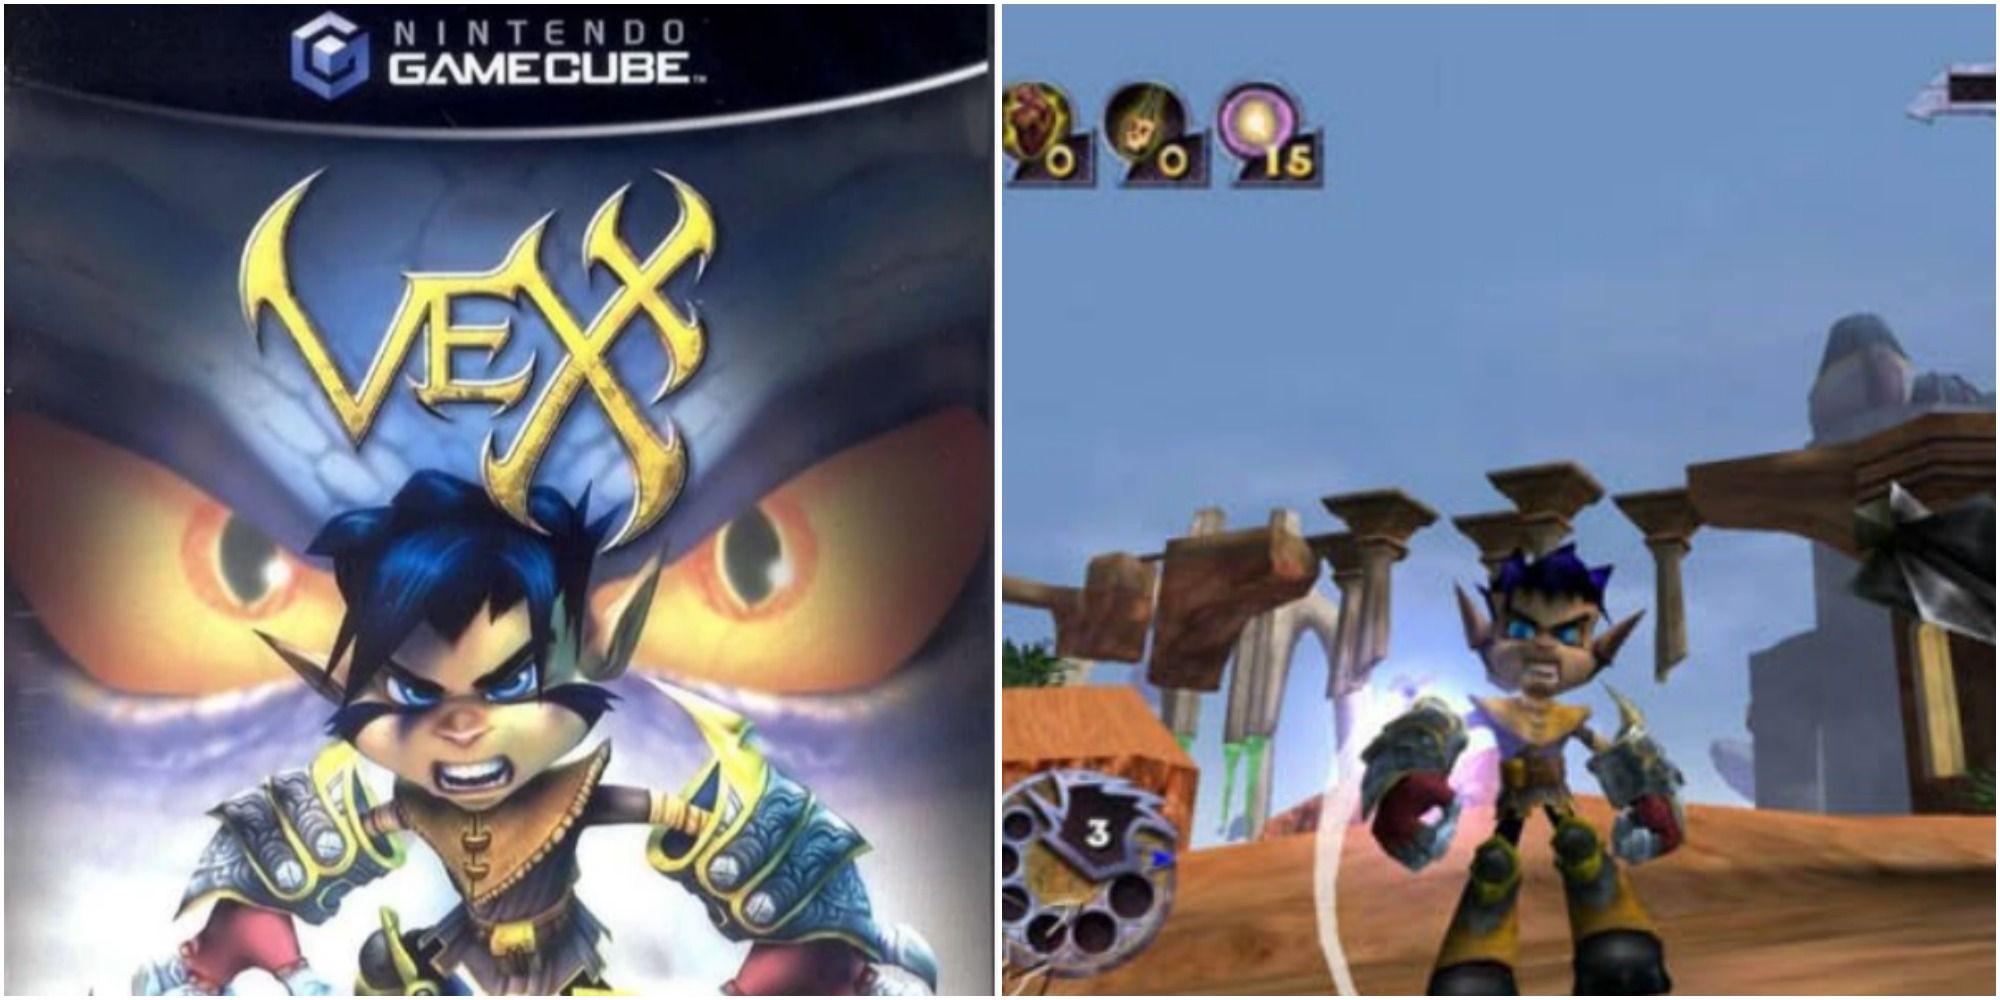 vexx character in action pose with eyes behind him and vess gameplay showing him in action featured